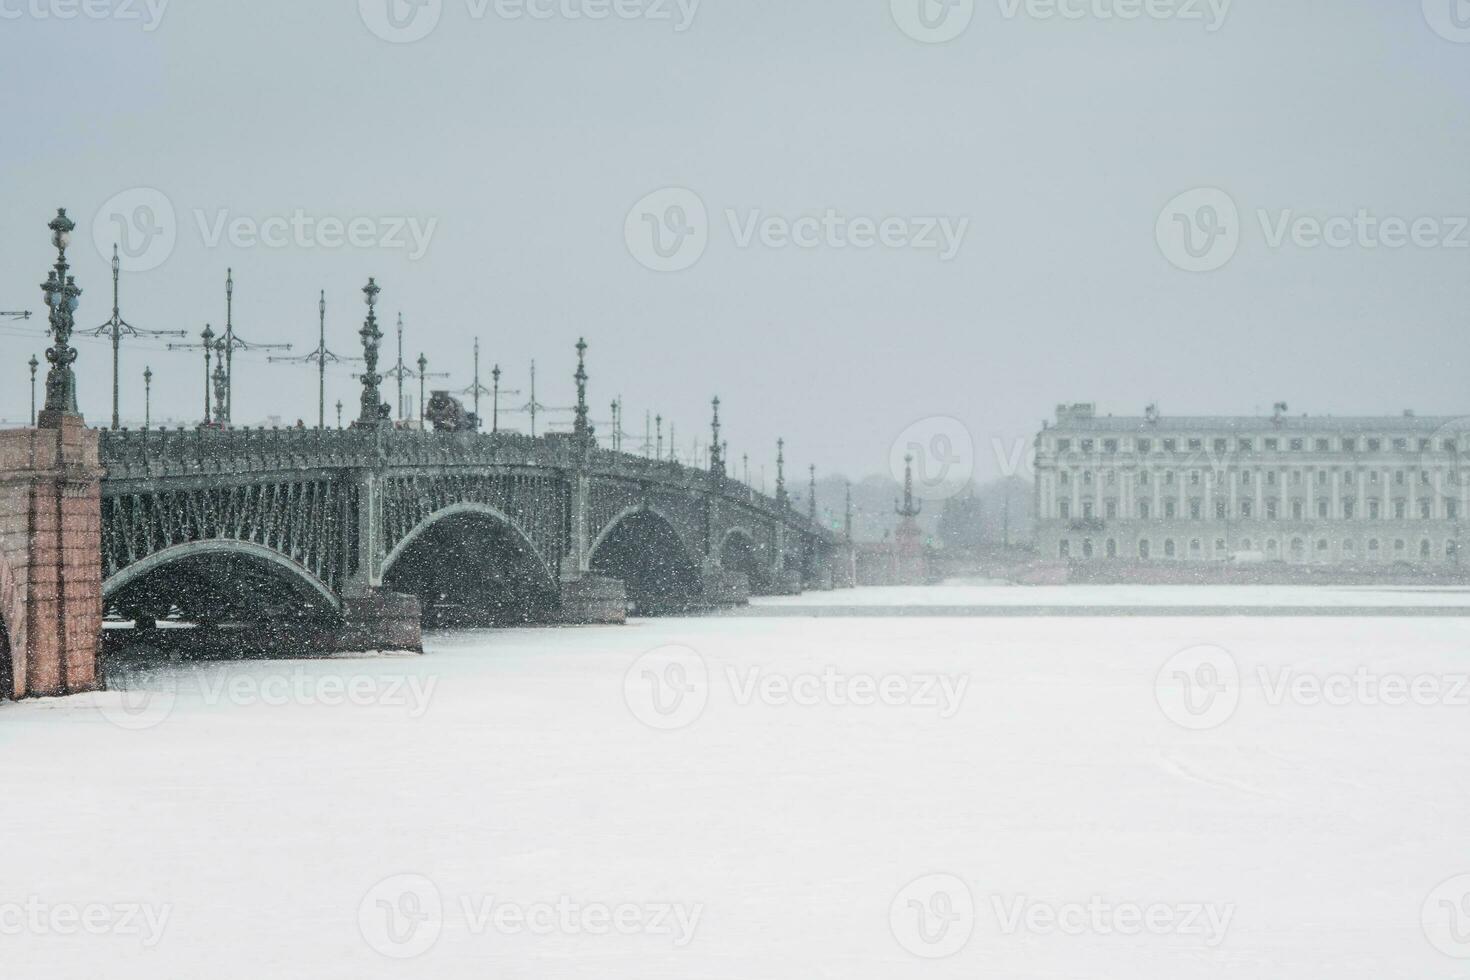 Palace Bridge in St. Petersburg during a snowfall. photo